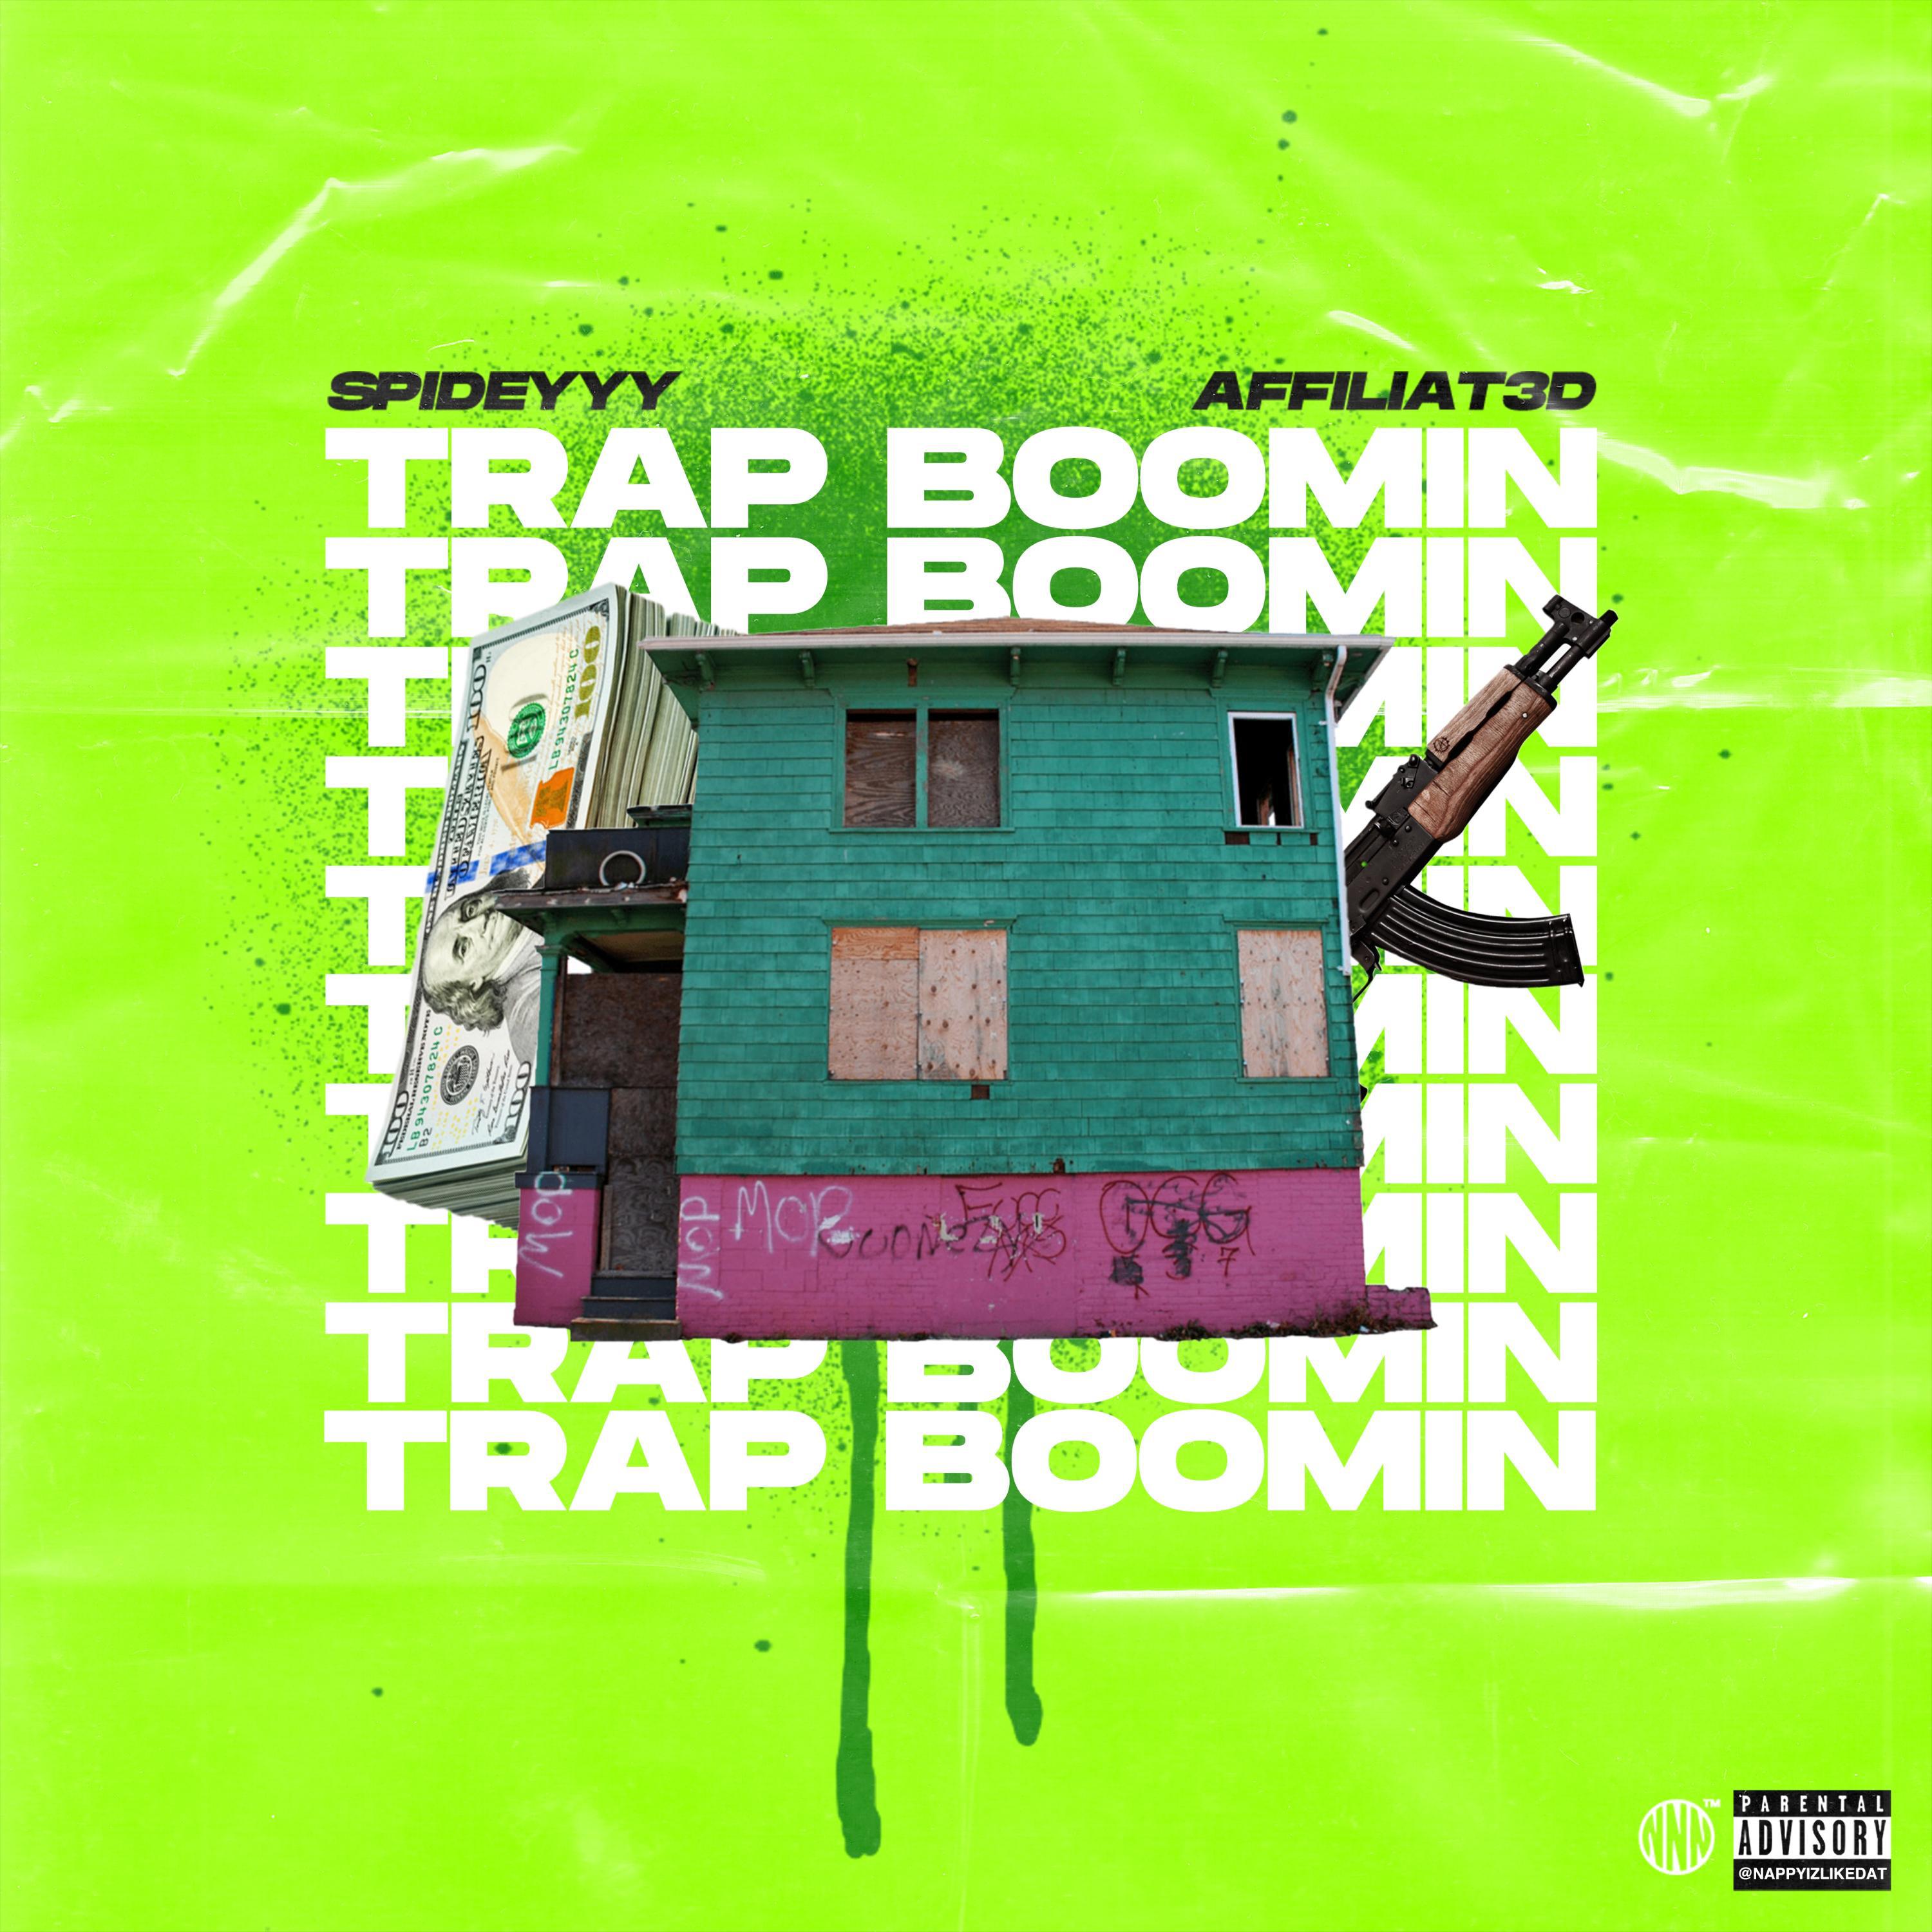 Spideyyy - Trap Boomin' (feat. Affiliat3d)